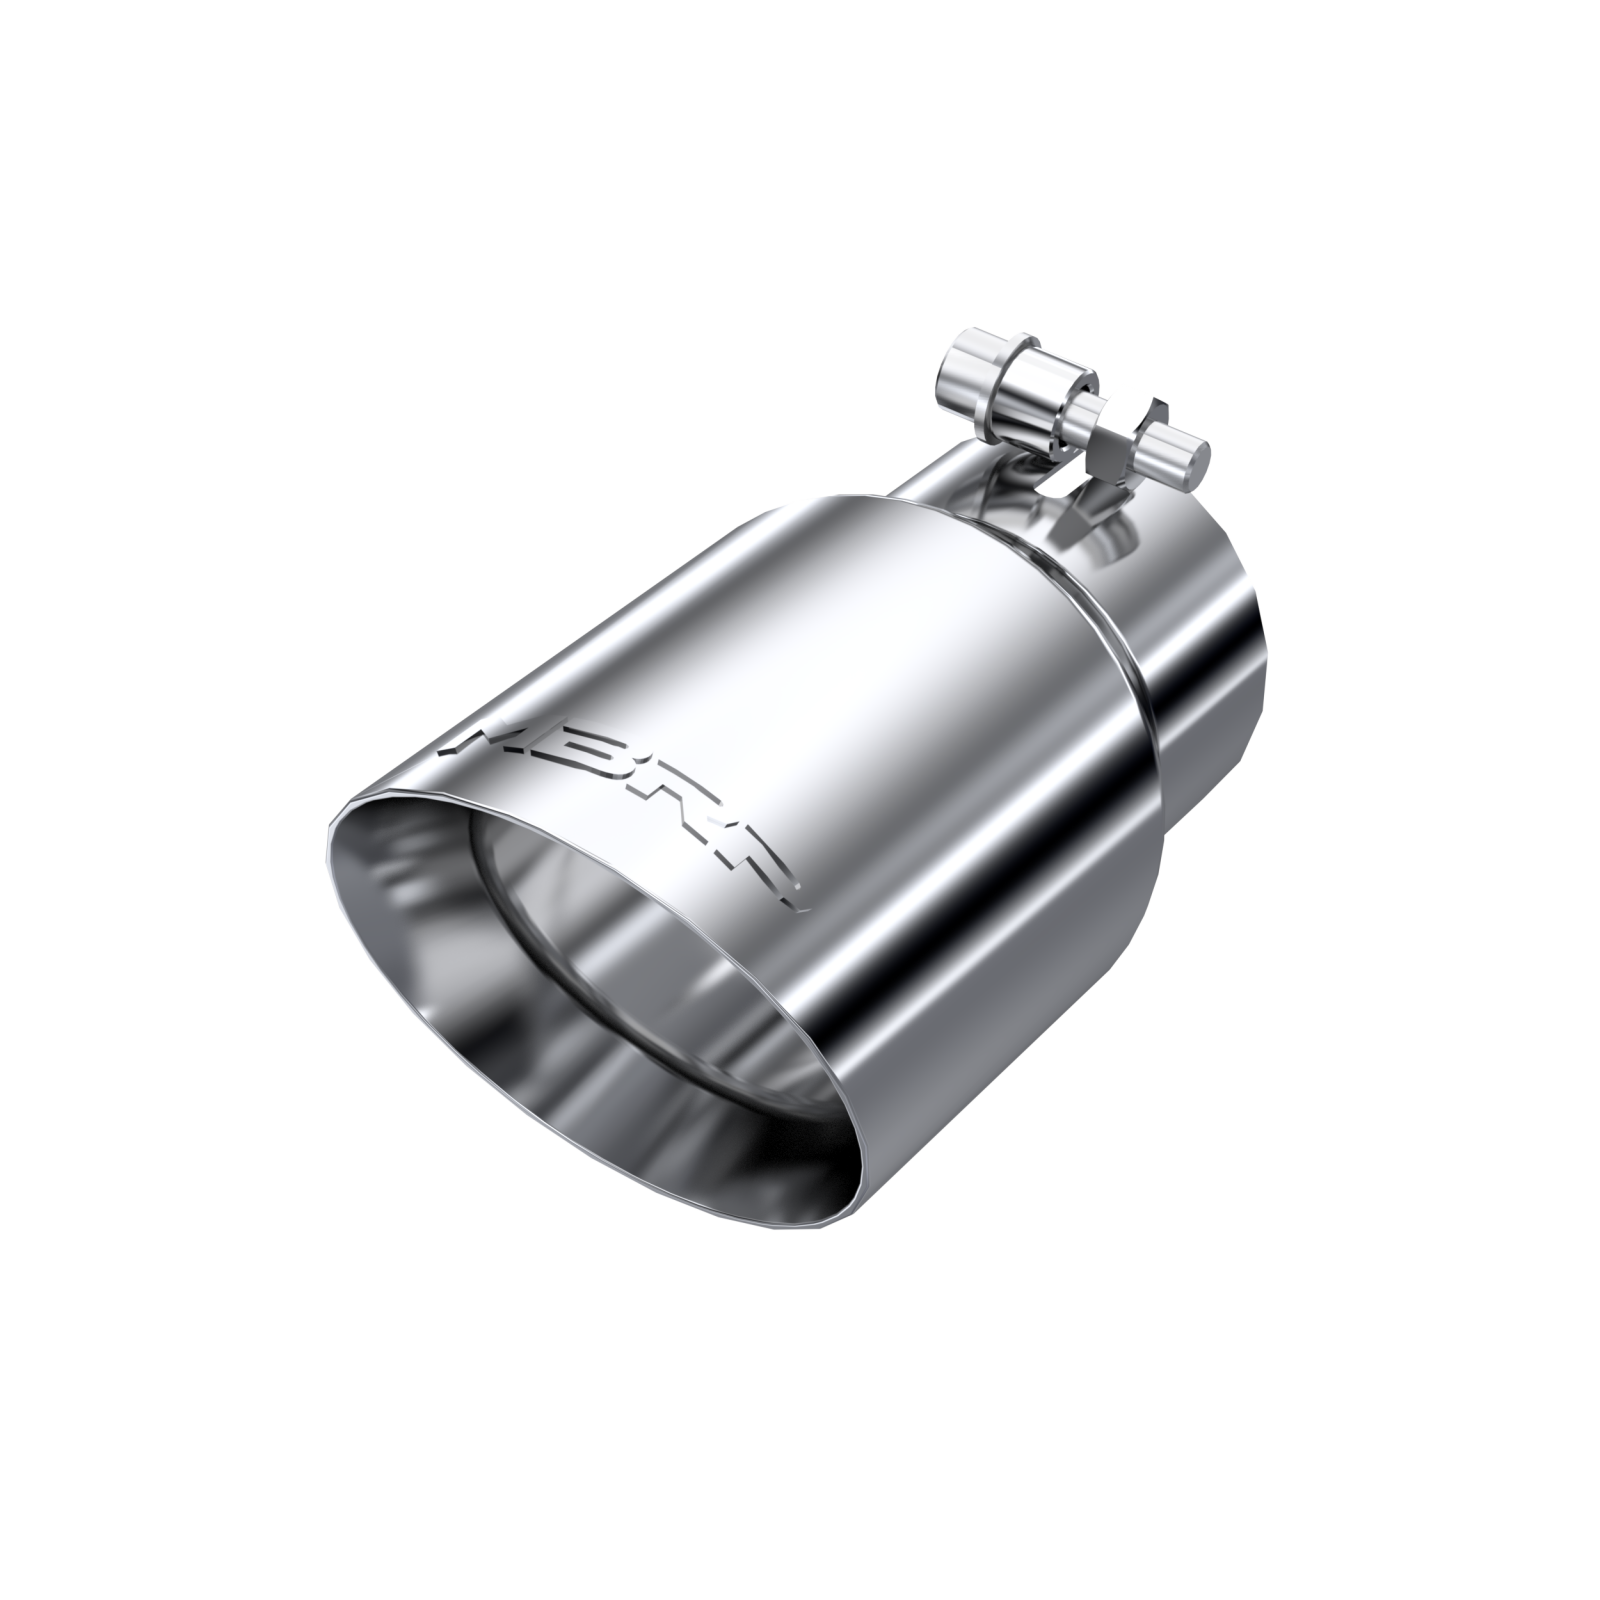 Exhaust Tip 4 in OD Dual Wall Angled Rolled End Fits Aluminized Steel 3 in Syste